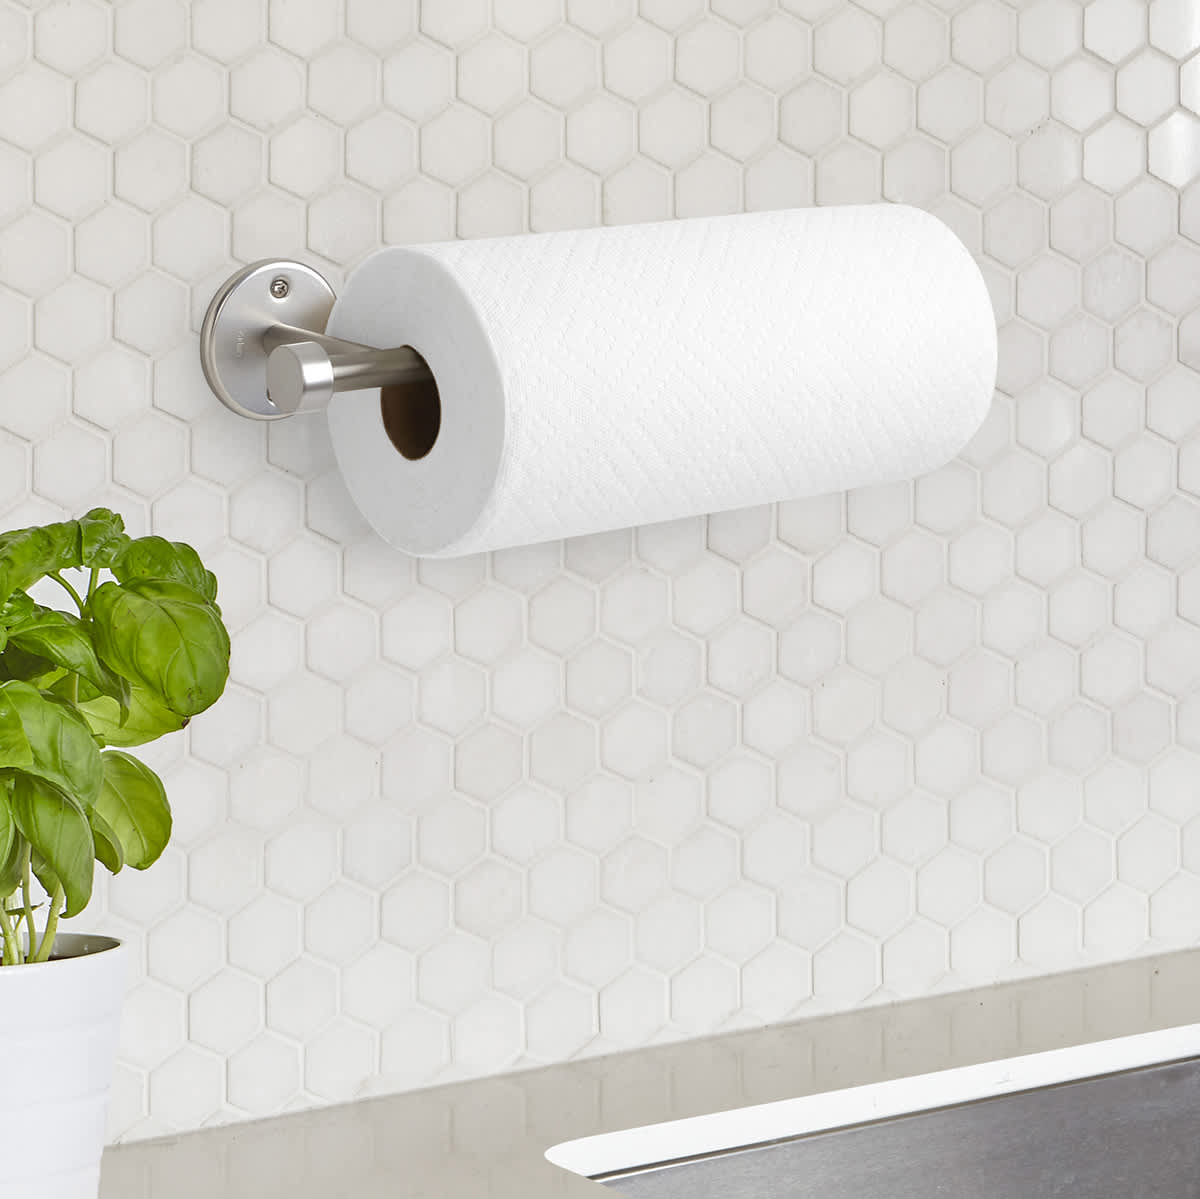 5 Favorites: The No-Drill Instant Paper Towel Holder - Remodelista